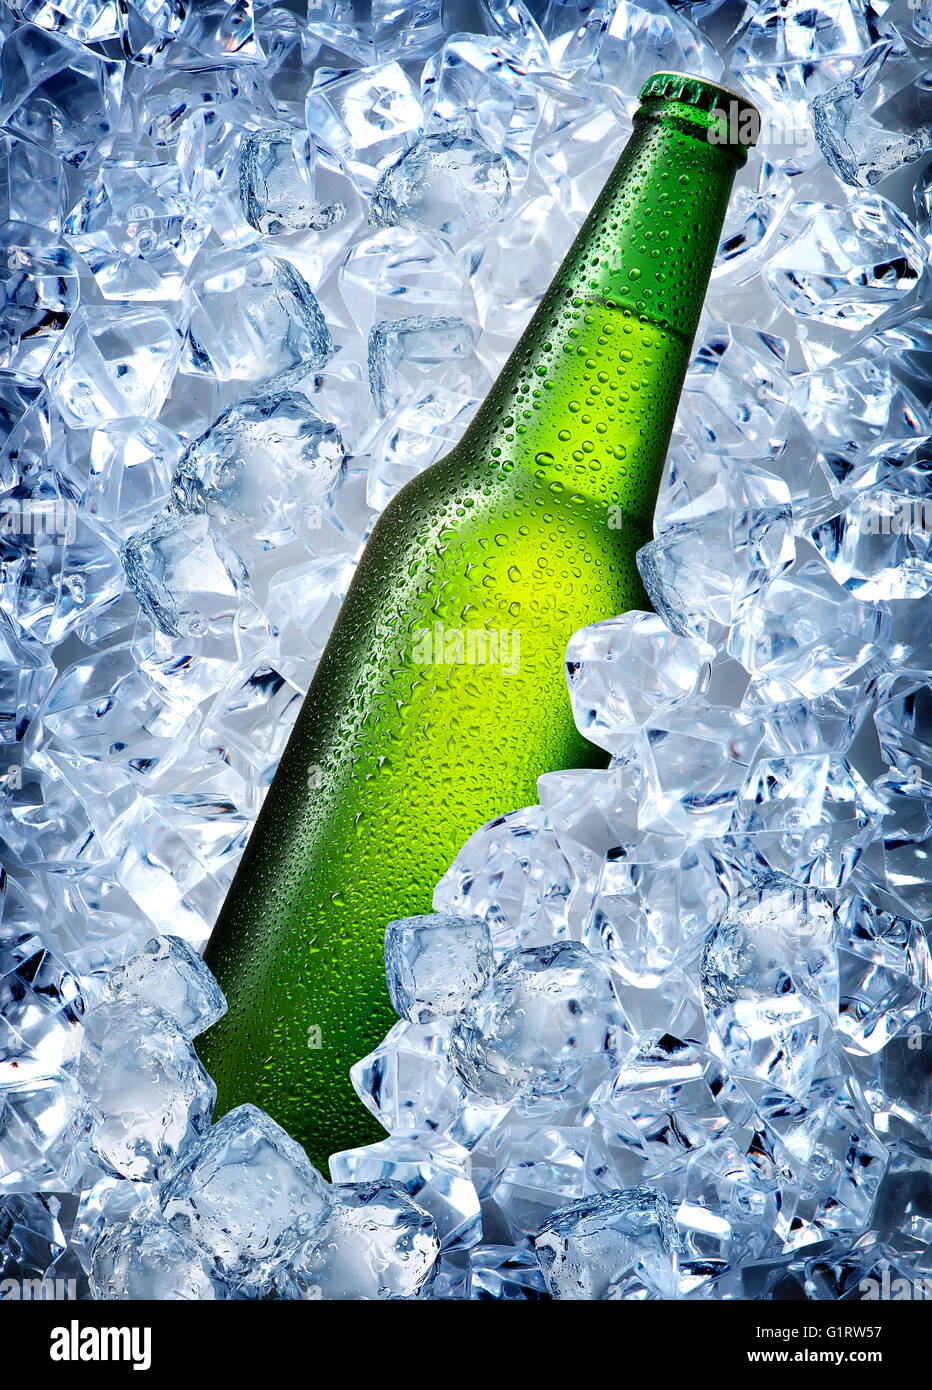 Green bottle in a cold blue ice Stock Photo